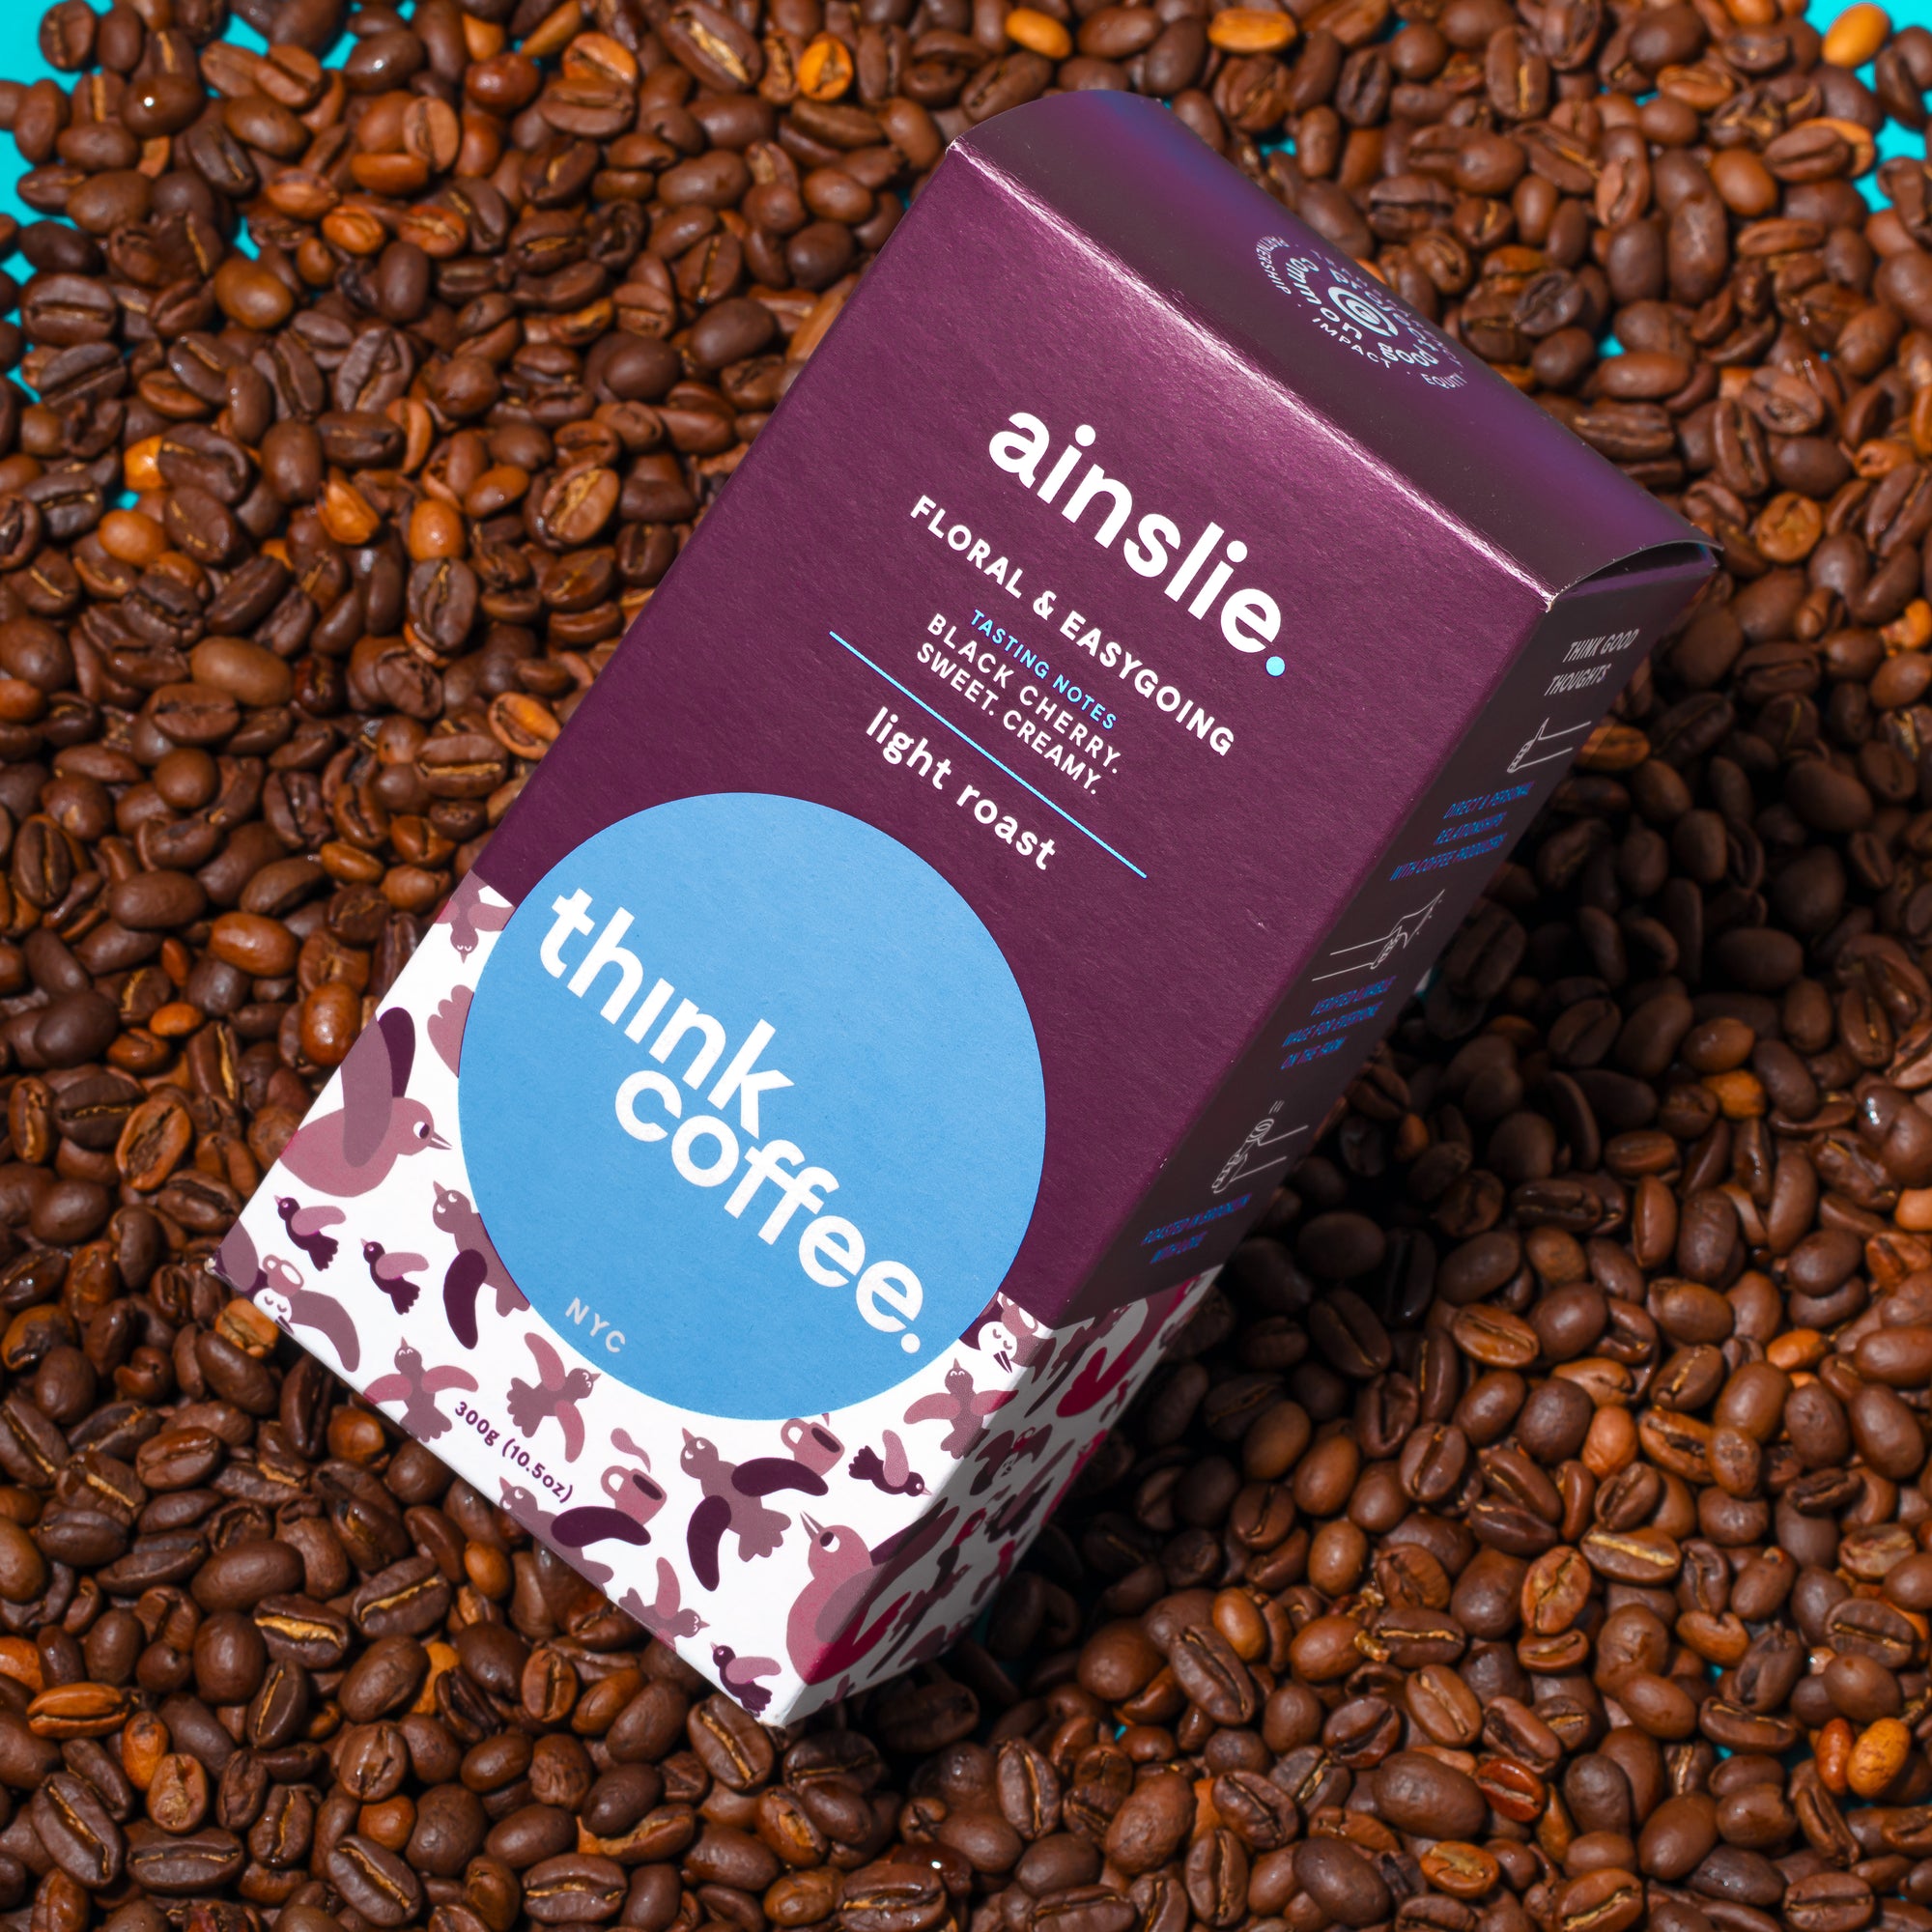 Ainslie Blend Weekly Subscription 6 months